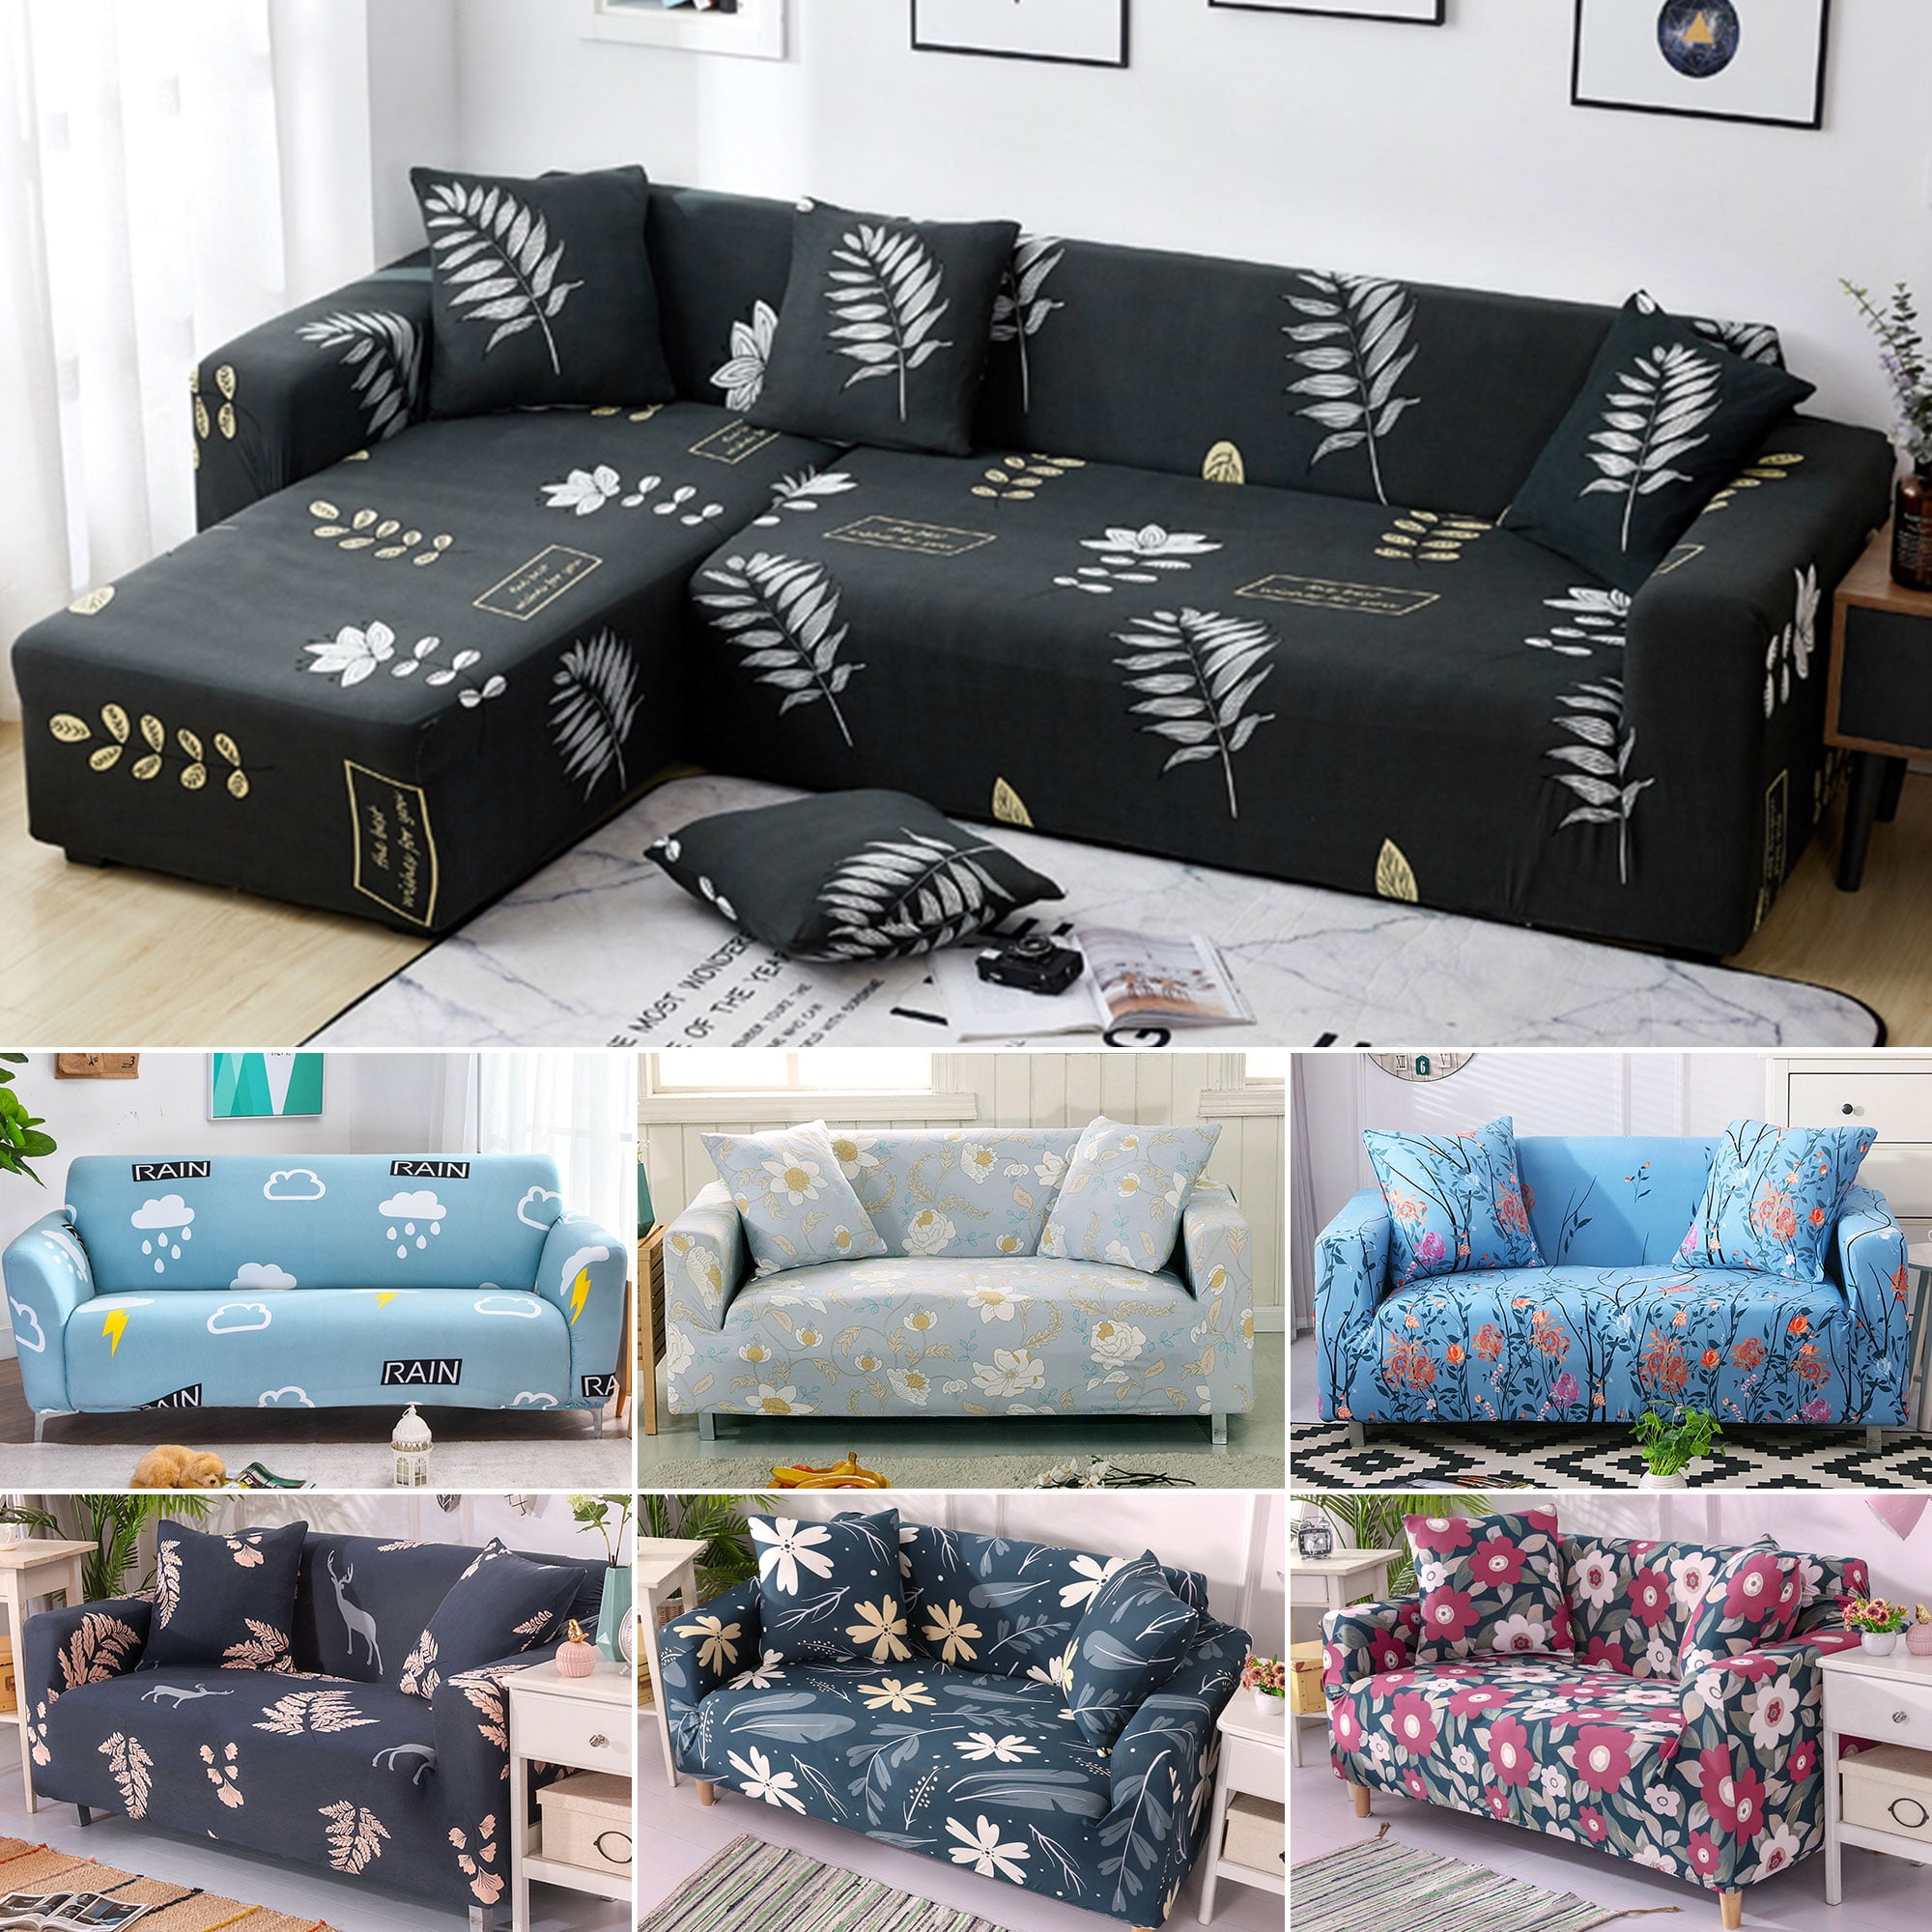 1PC Home Sofa Couch Cover Slipcover Floral Sofa Towel Protector Pet Dog Cat Mat 